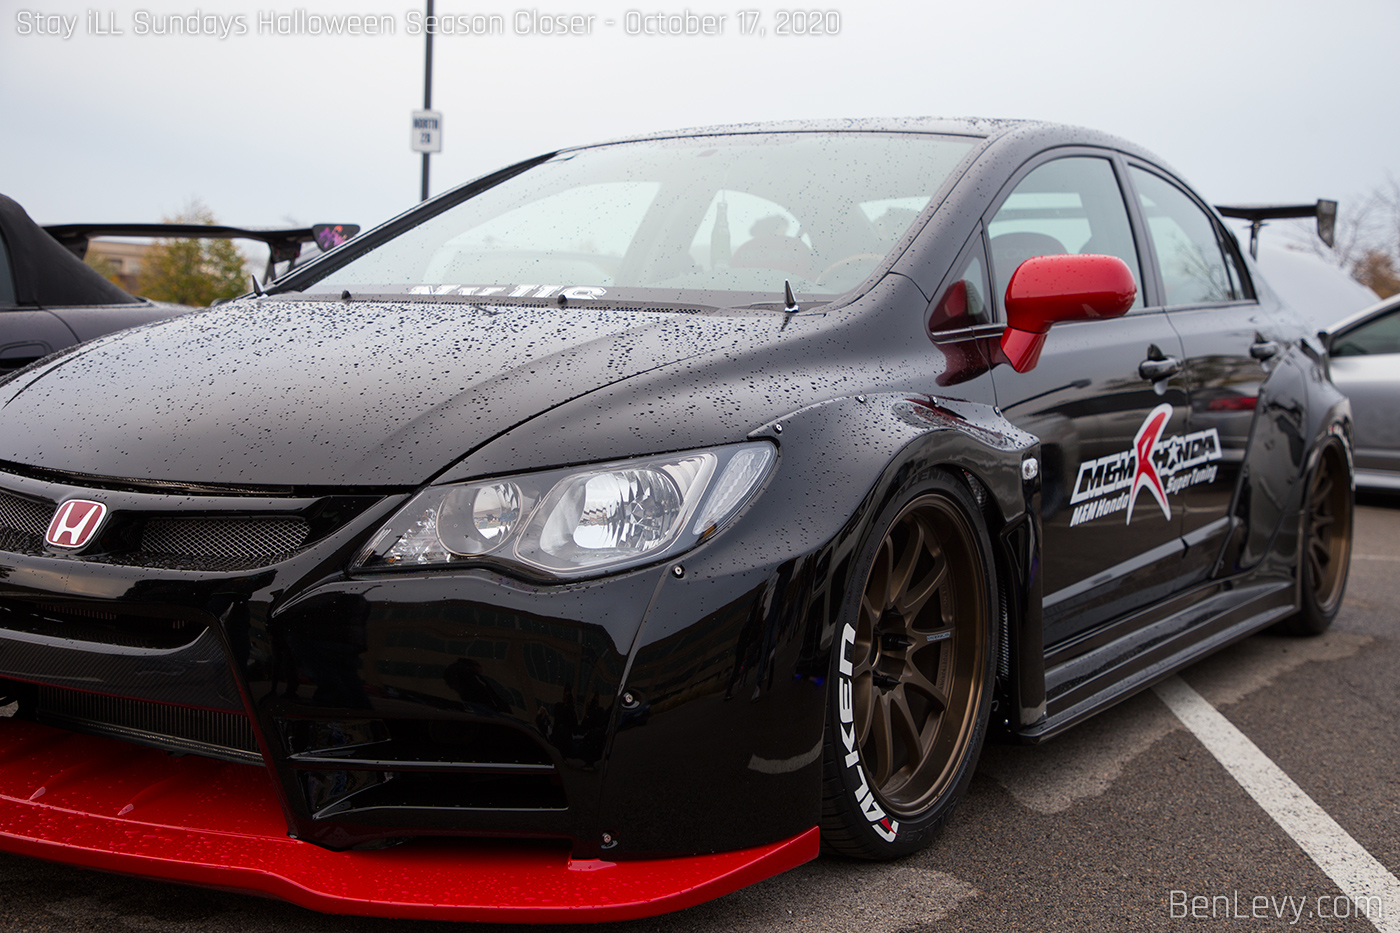 Wide Front Fenders on 8th Generation Honda Civic Si